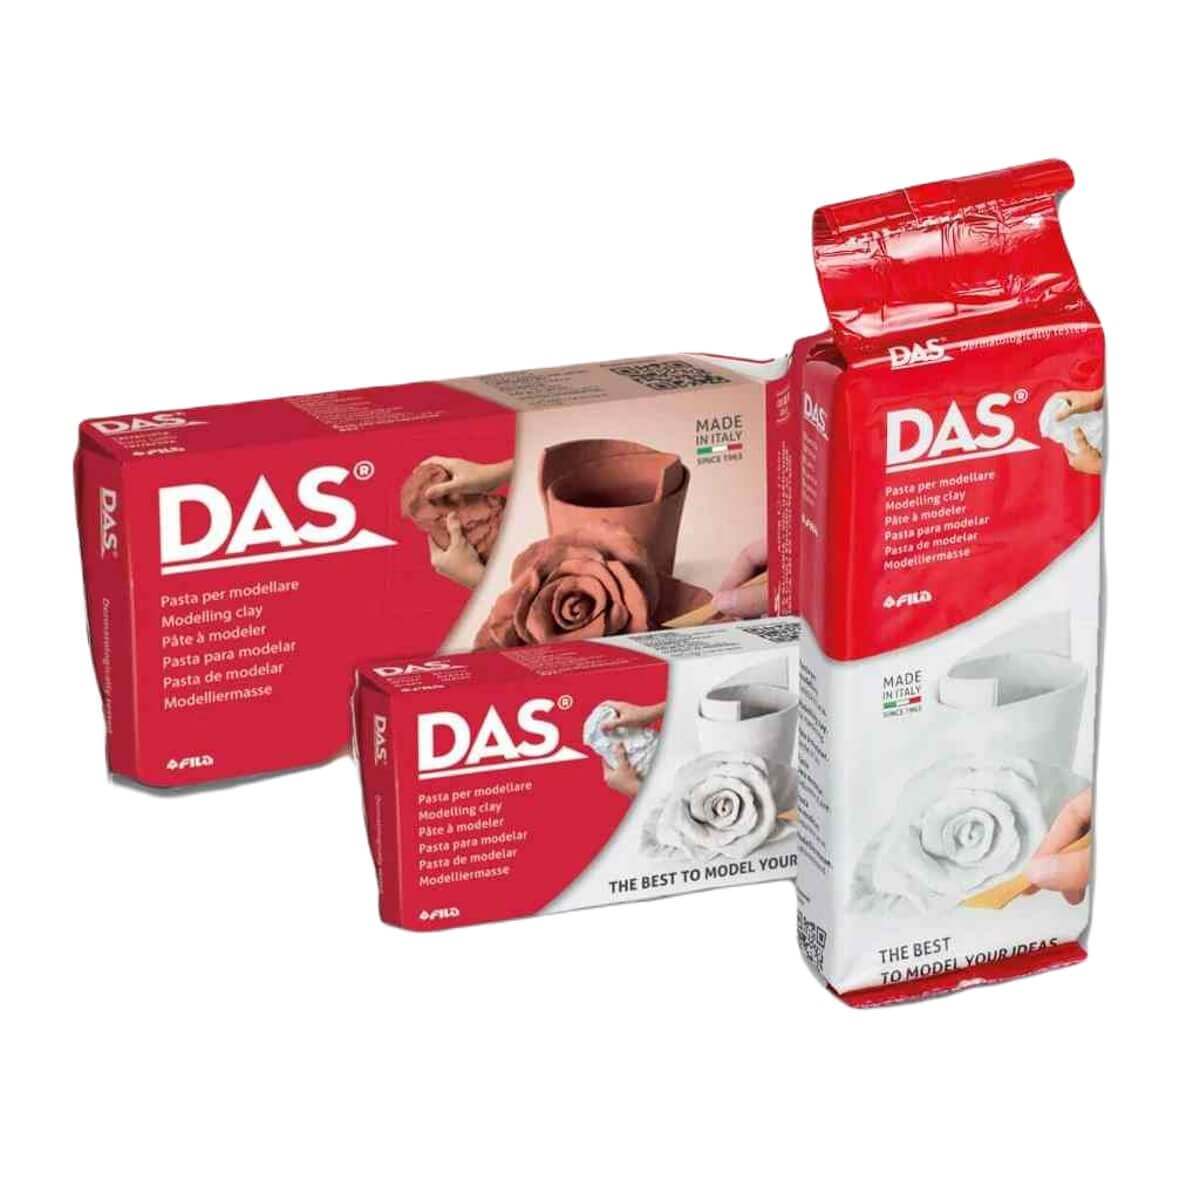 DAS Modelling Clay, 500g or 1kg, in 3 Colours - White, Terracotta or Stone  DAS Modelling Clay : Shop online to find the best selection